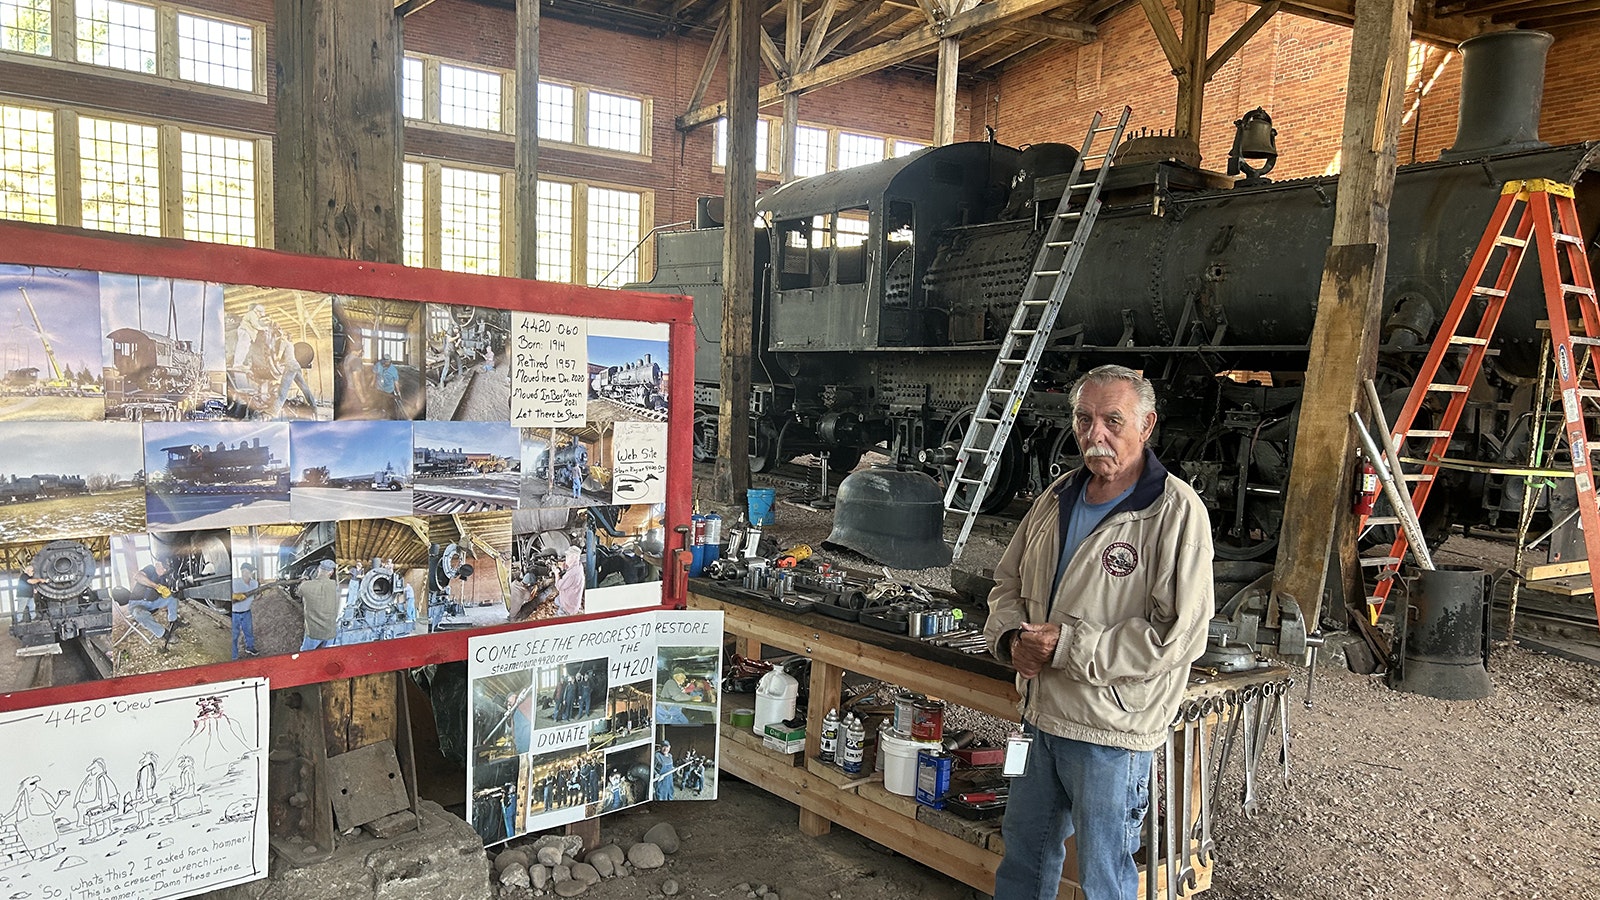 Tour guide Joe Dean shows a story board illustrating the rebuild of 4420 a steam locomotive thats been moved around Evanston for the last 40 years.